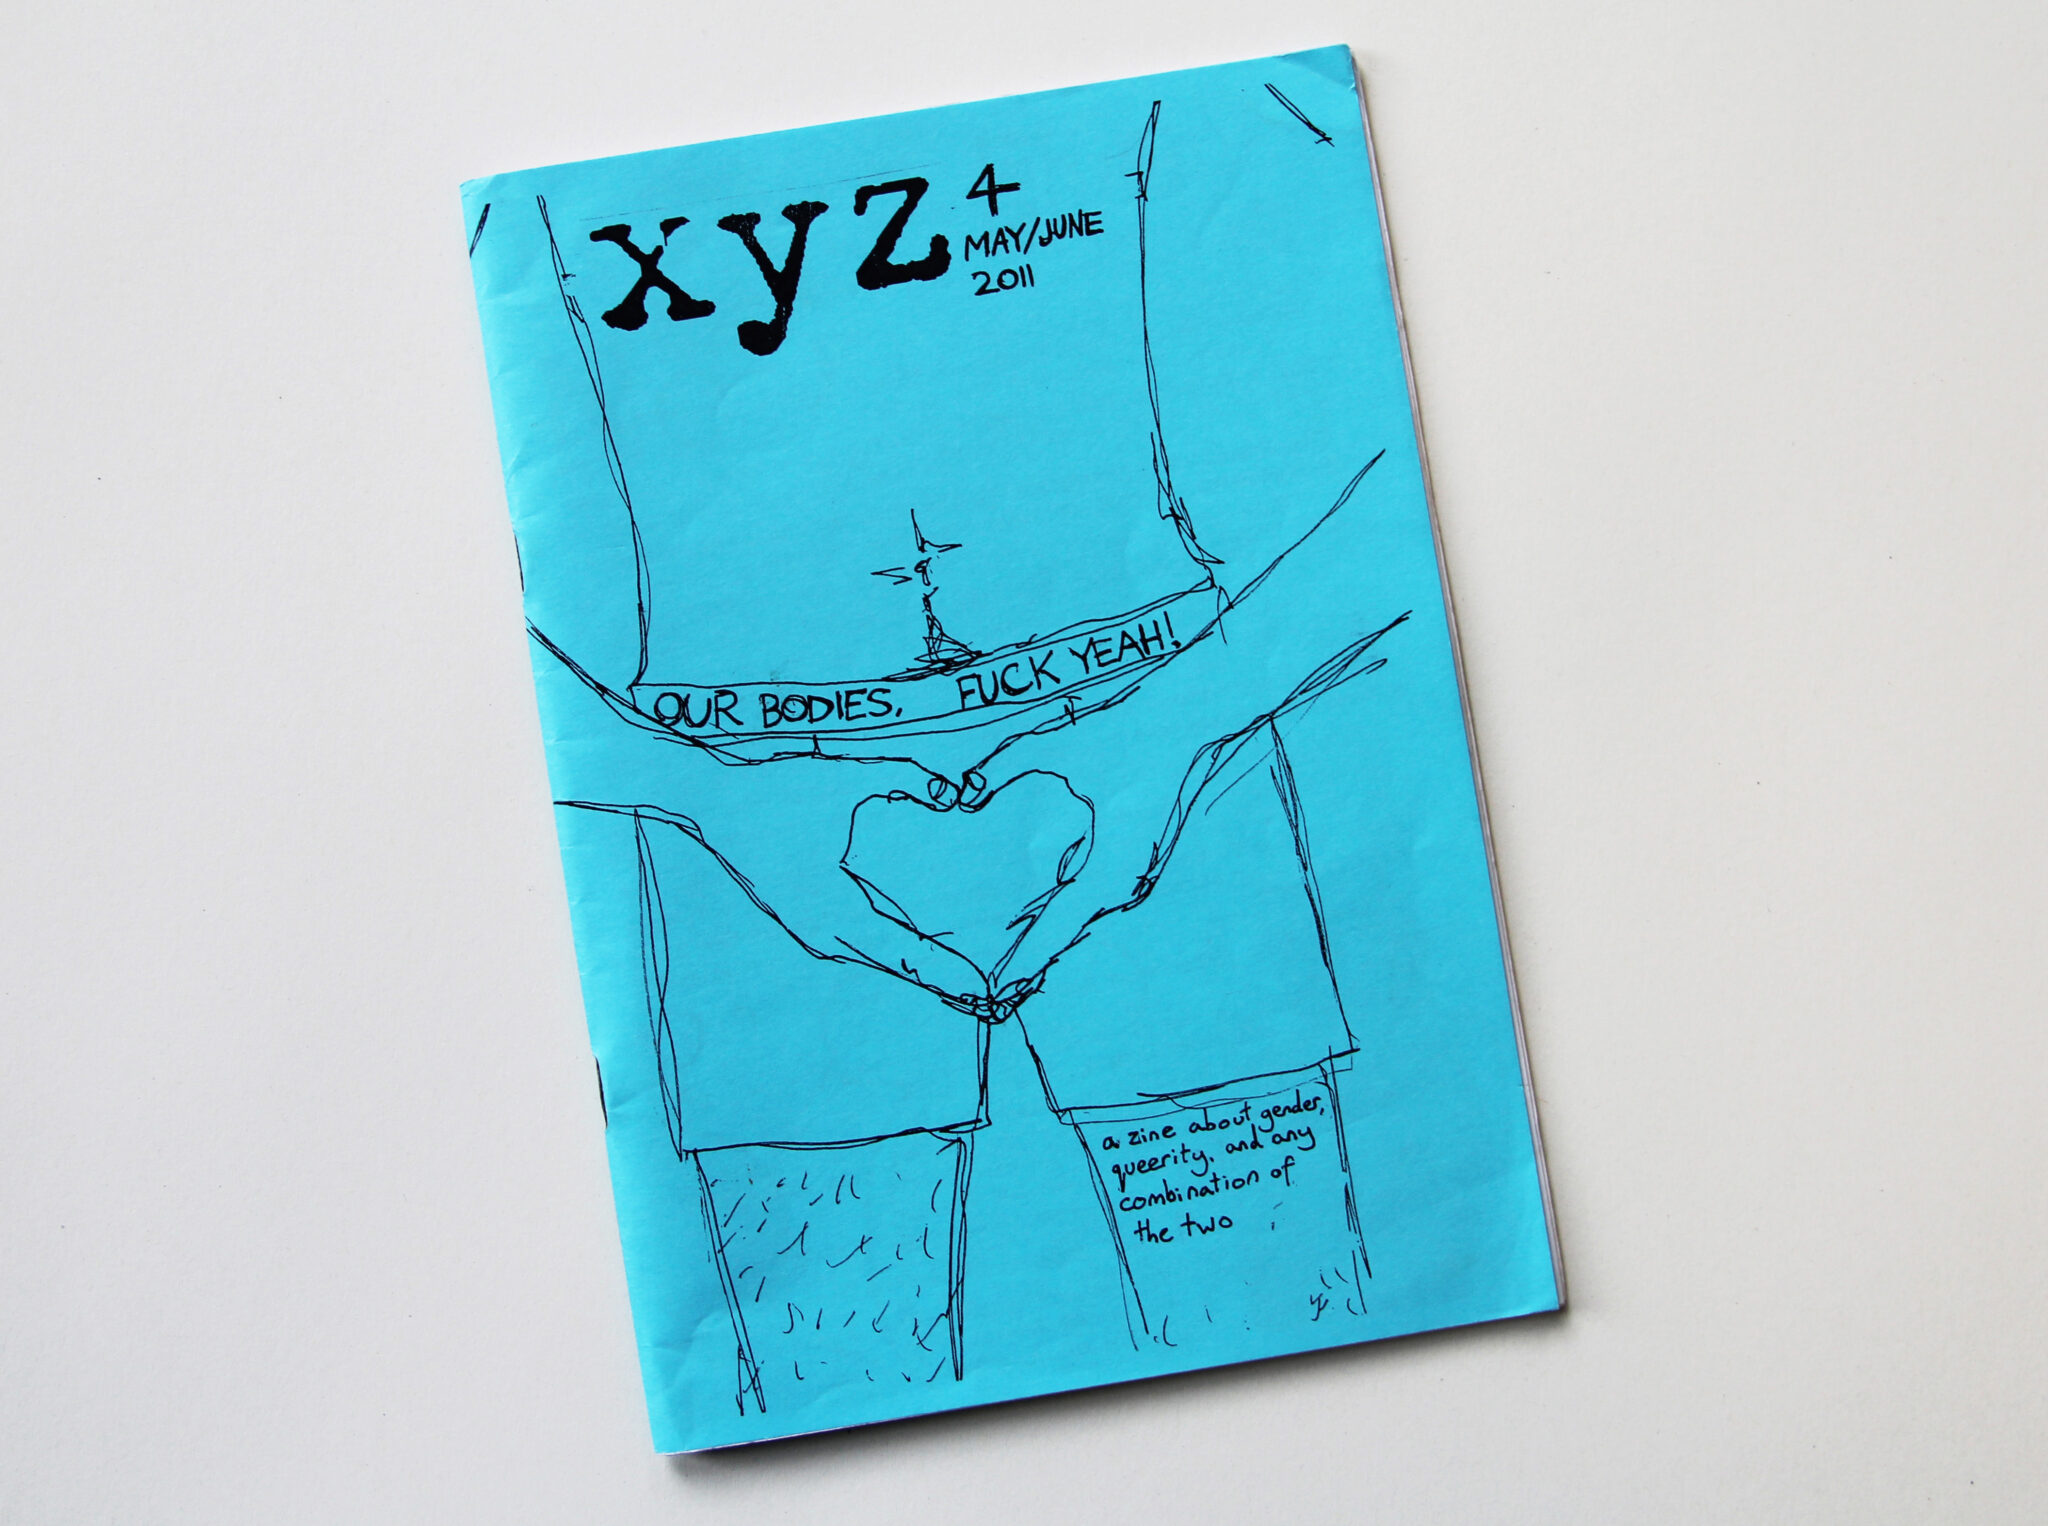 Photo of a handmade zine called xyz placed on a white surface